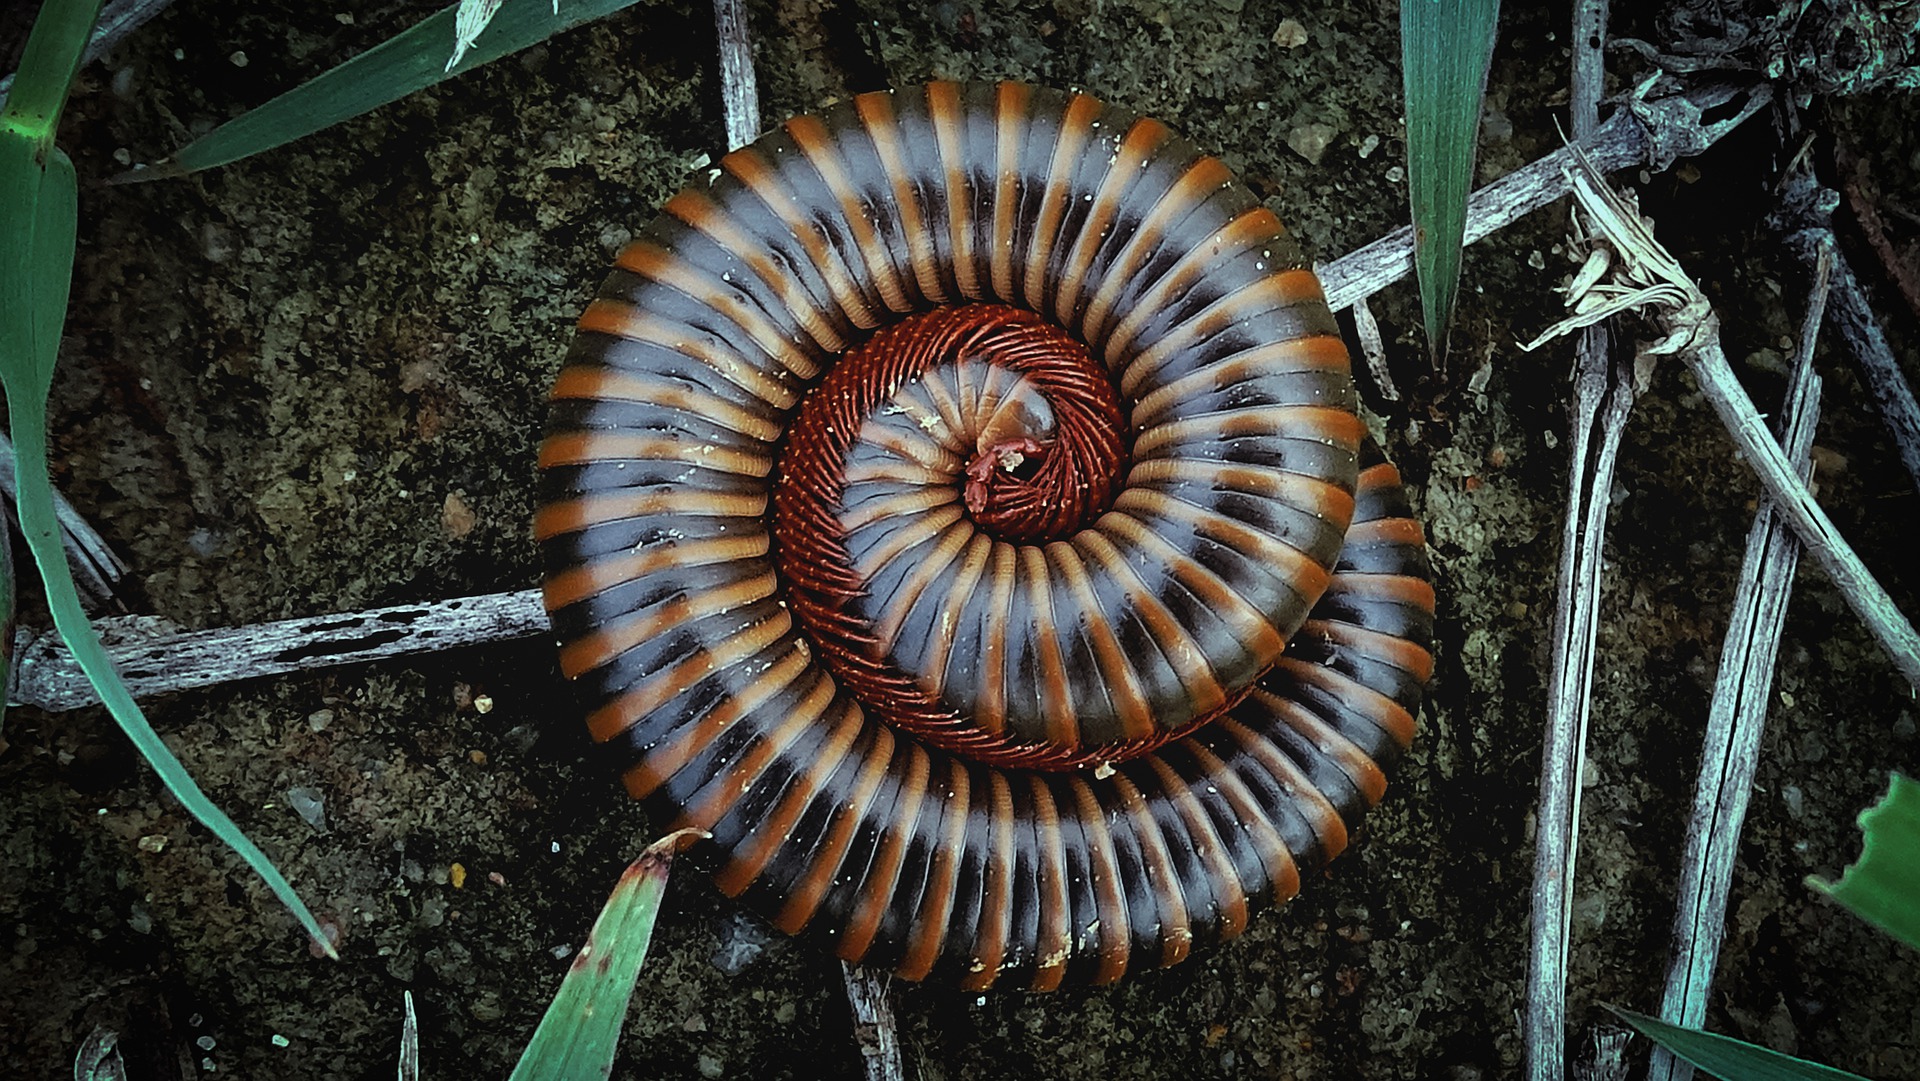 A giant millipede tightly coiled up.